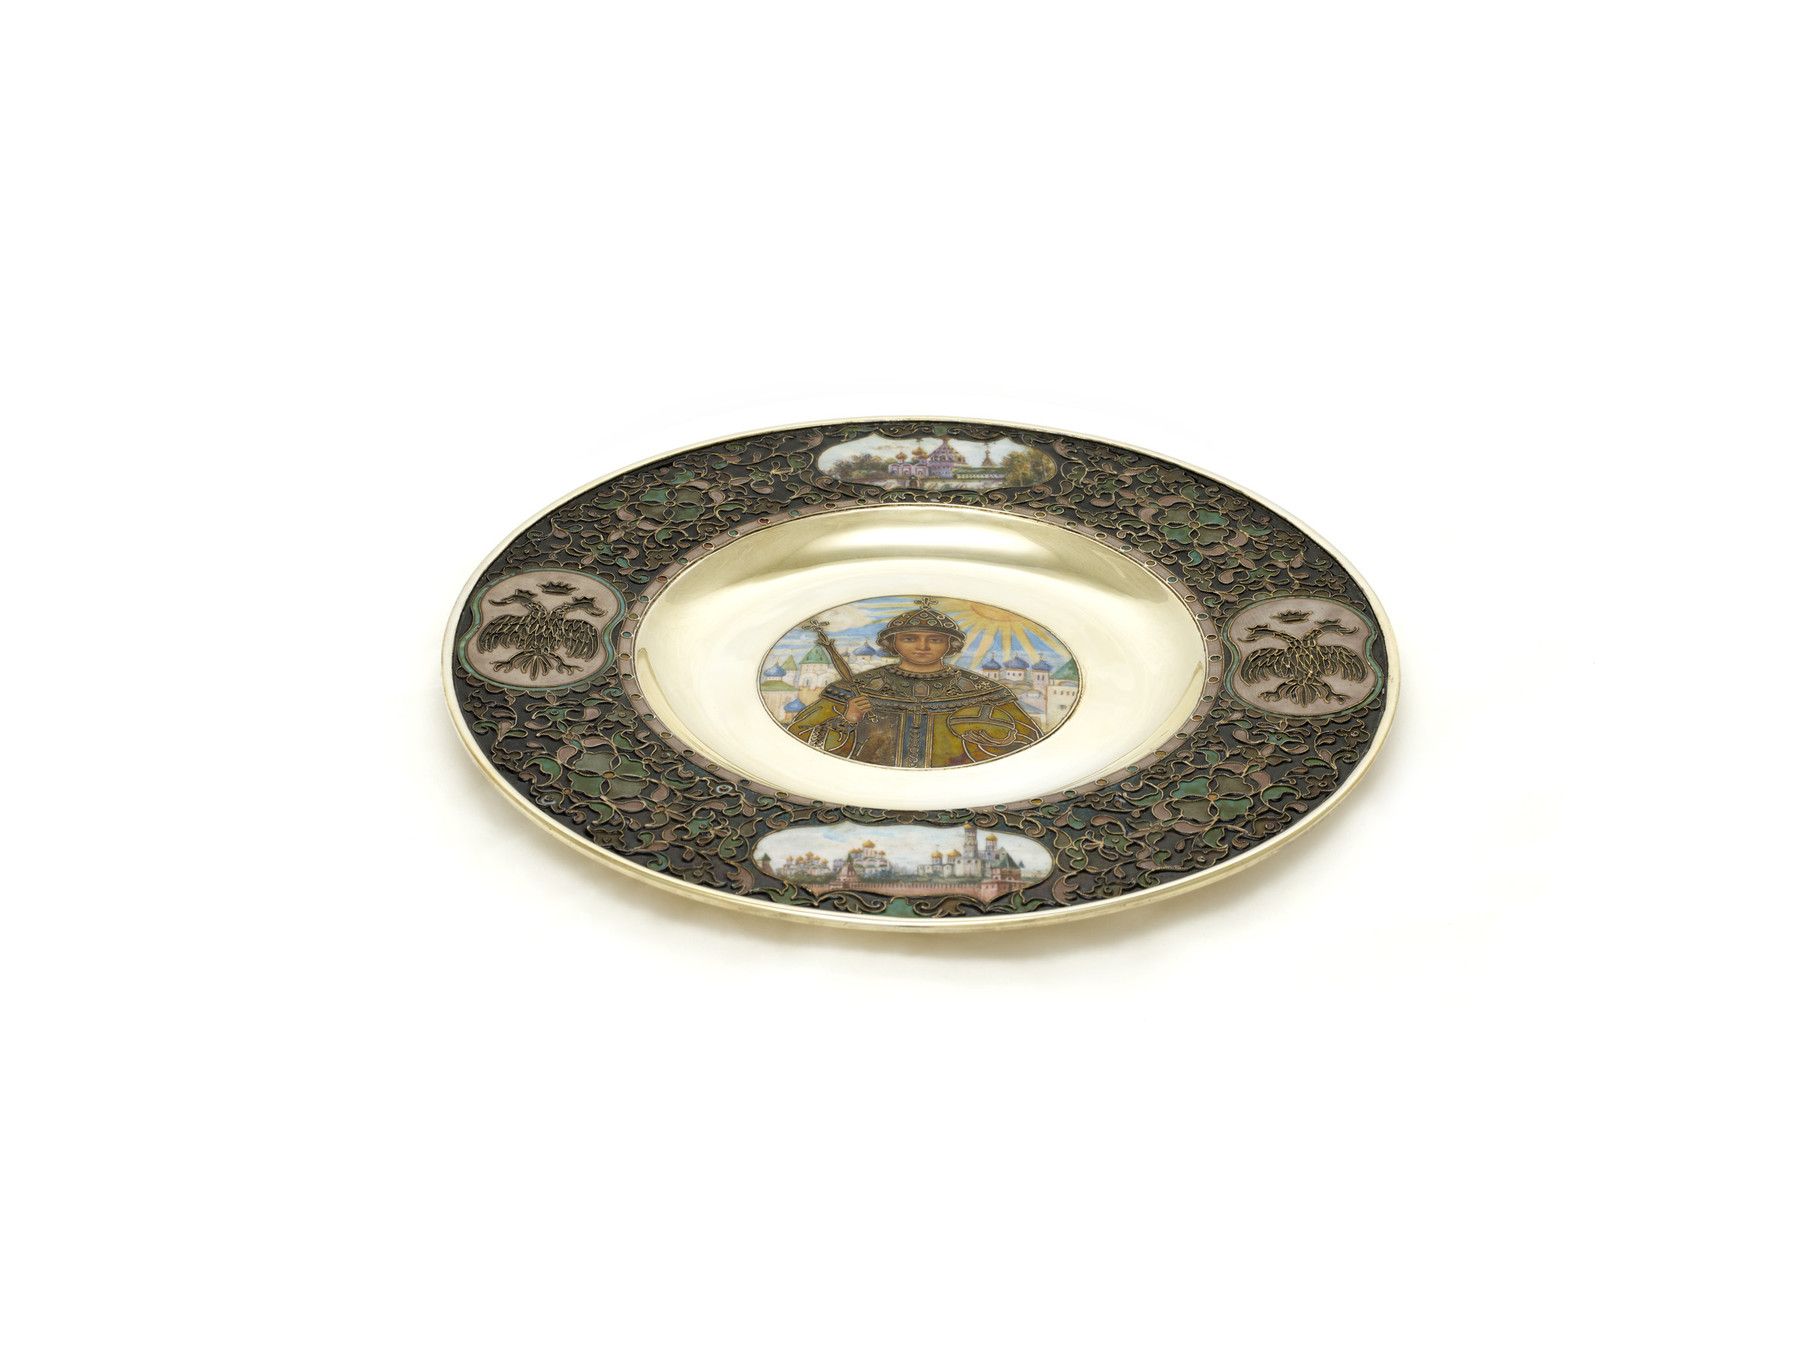 Image for Presentation Plate with Portrait of Tsar Michael